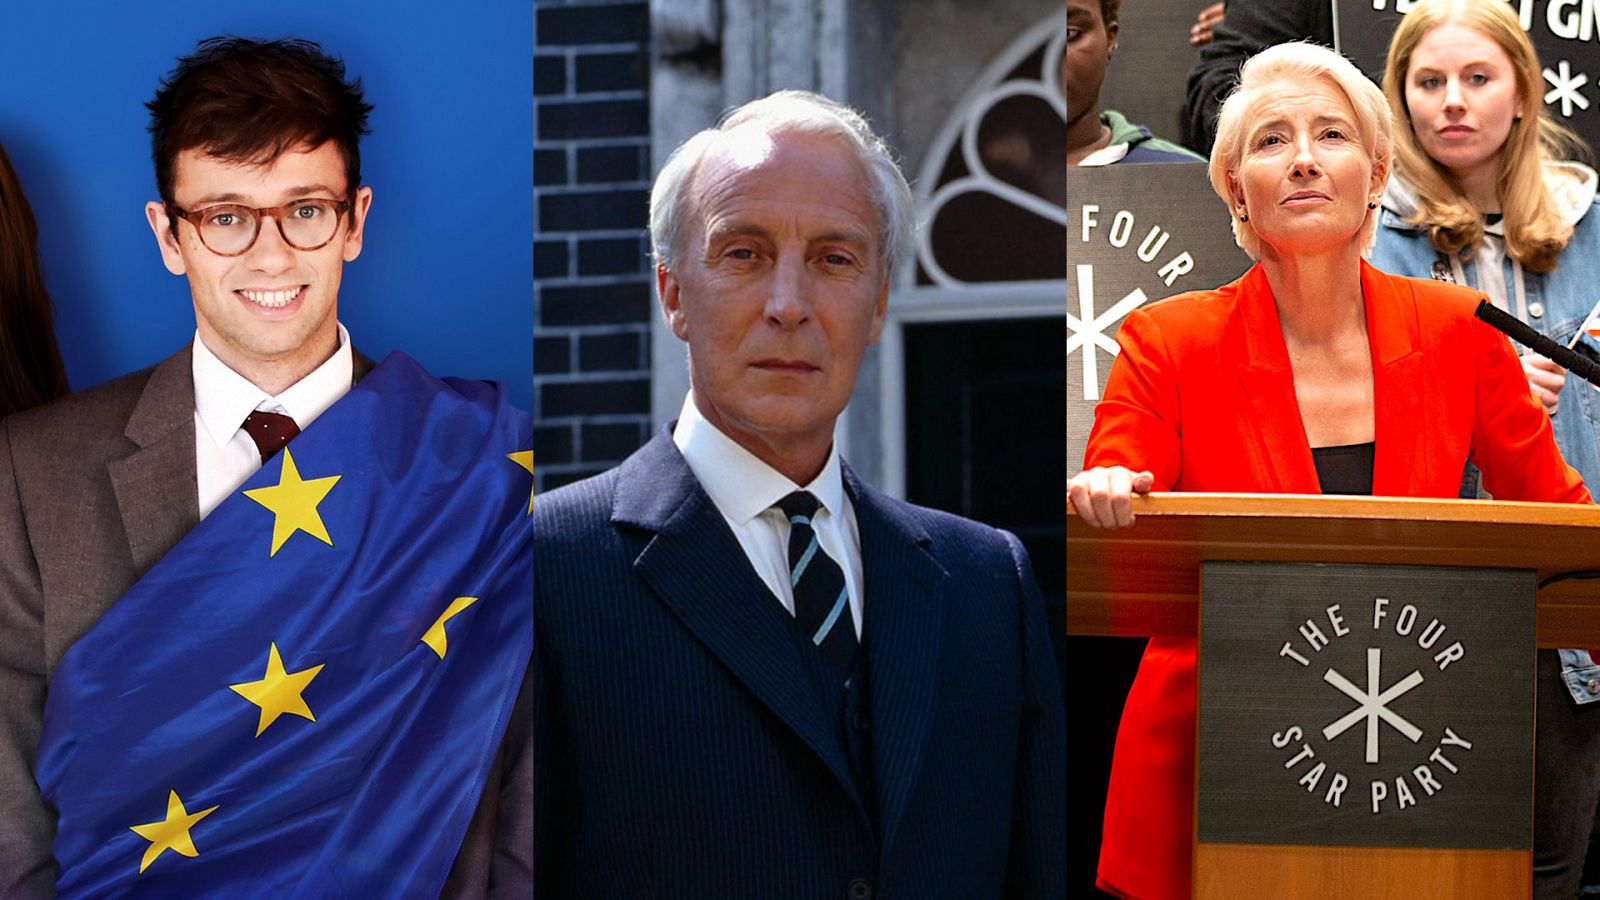 Samy Kantor (Parlamento), Vivienne Rook (Years and Years) y Francis Urquhart (House of Cards)